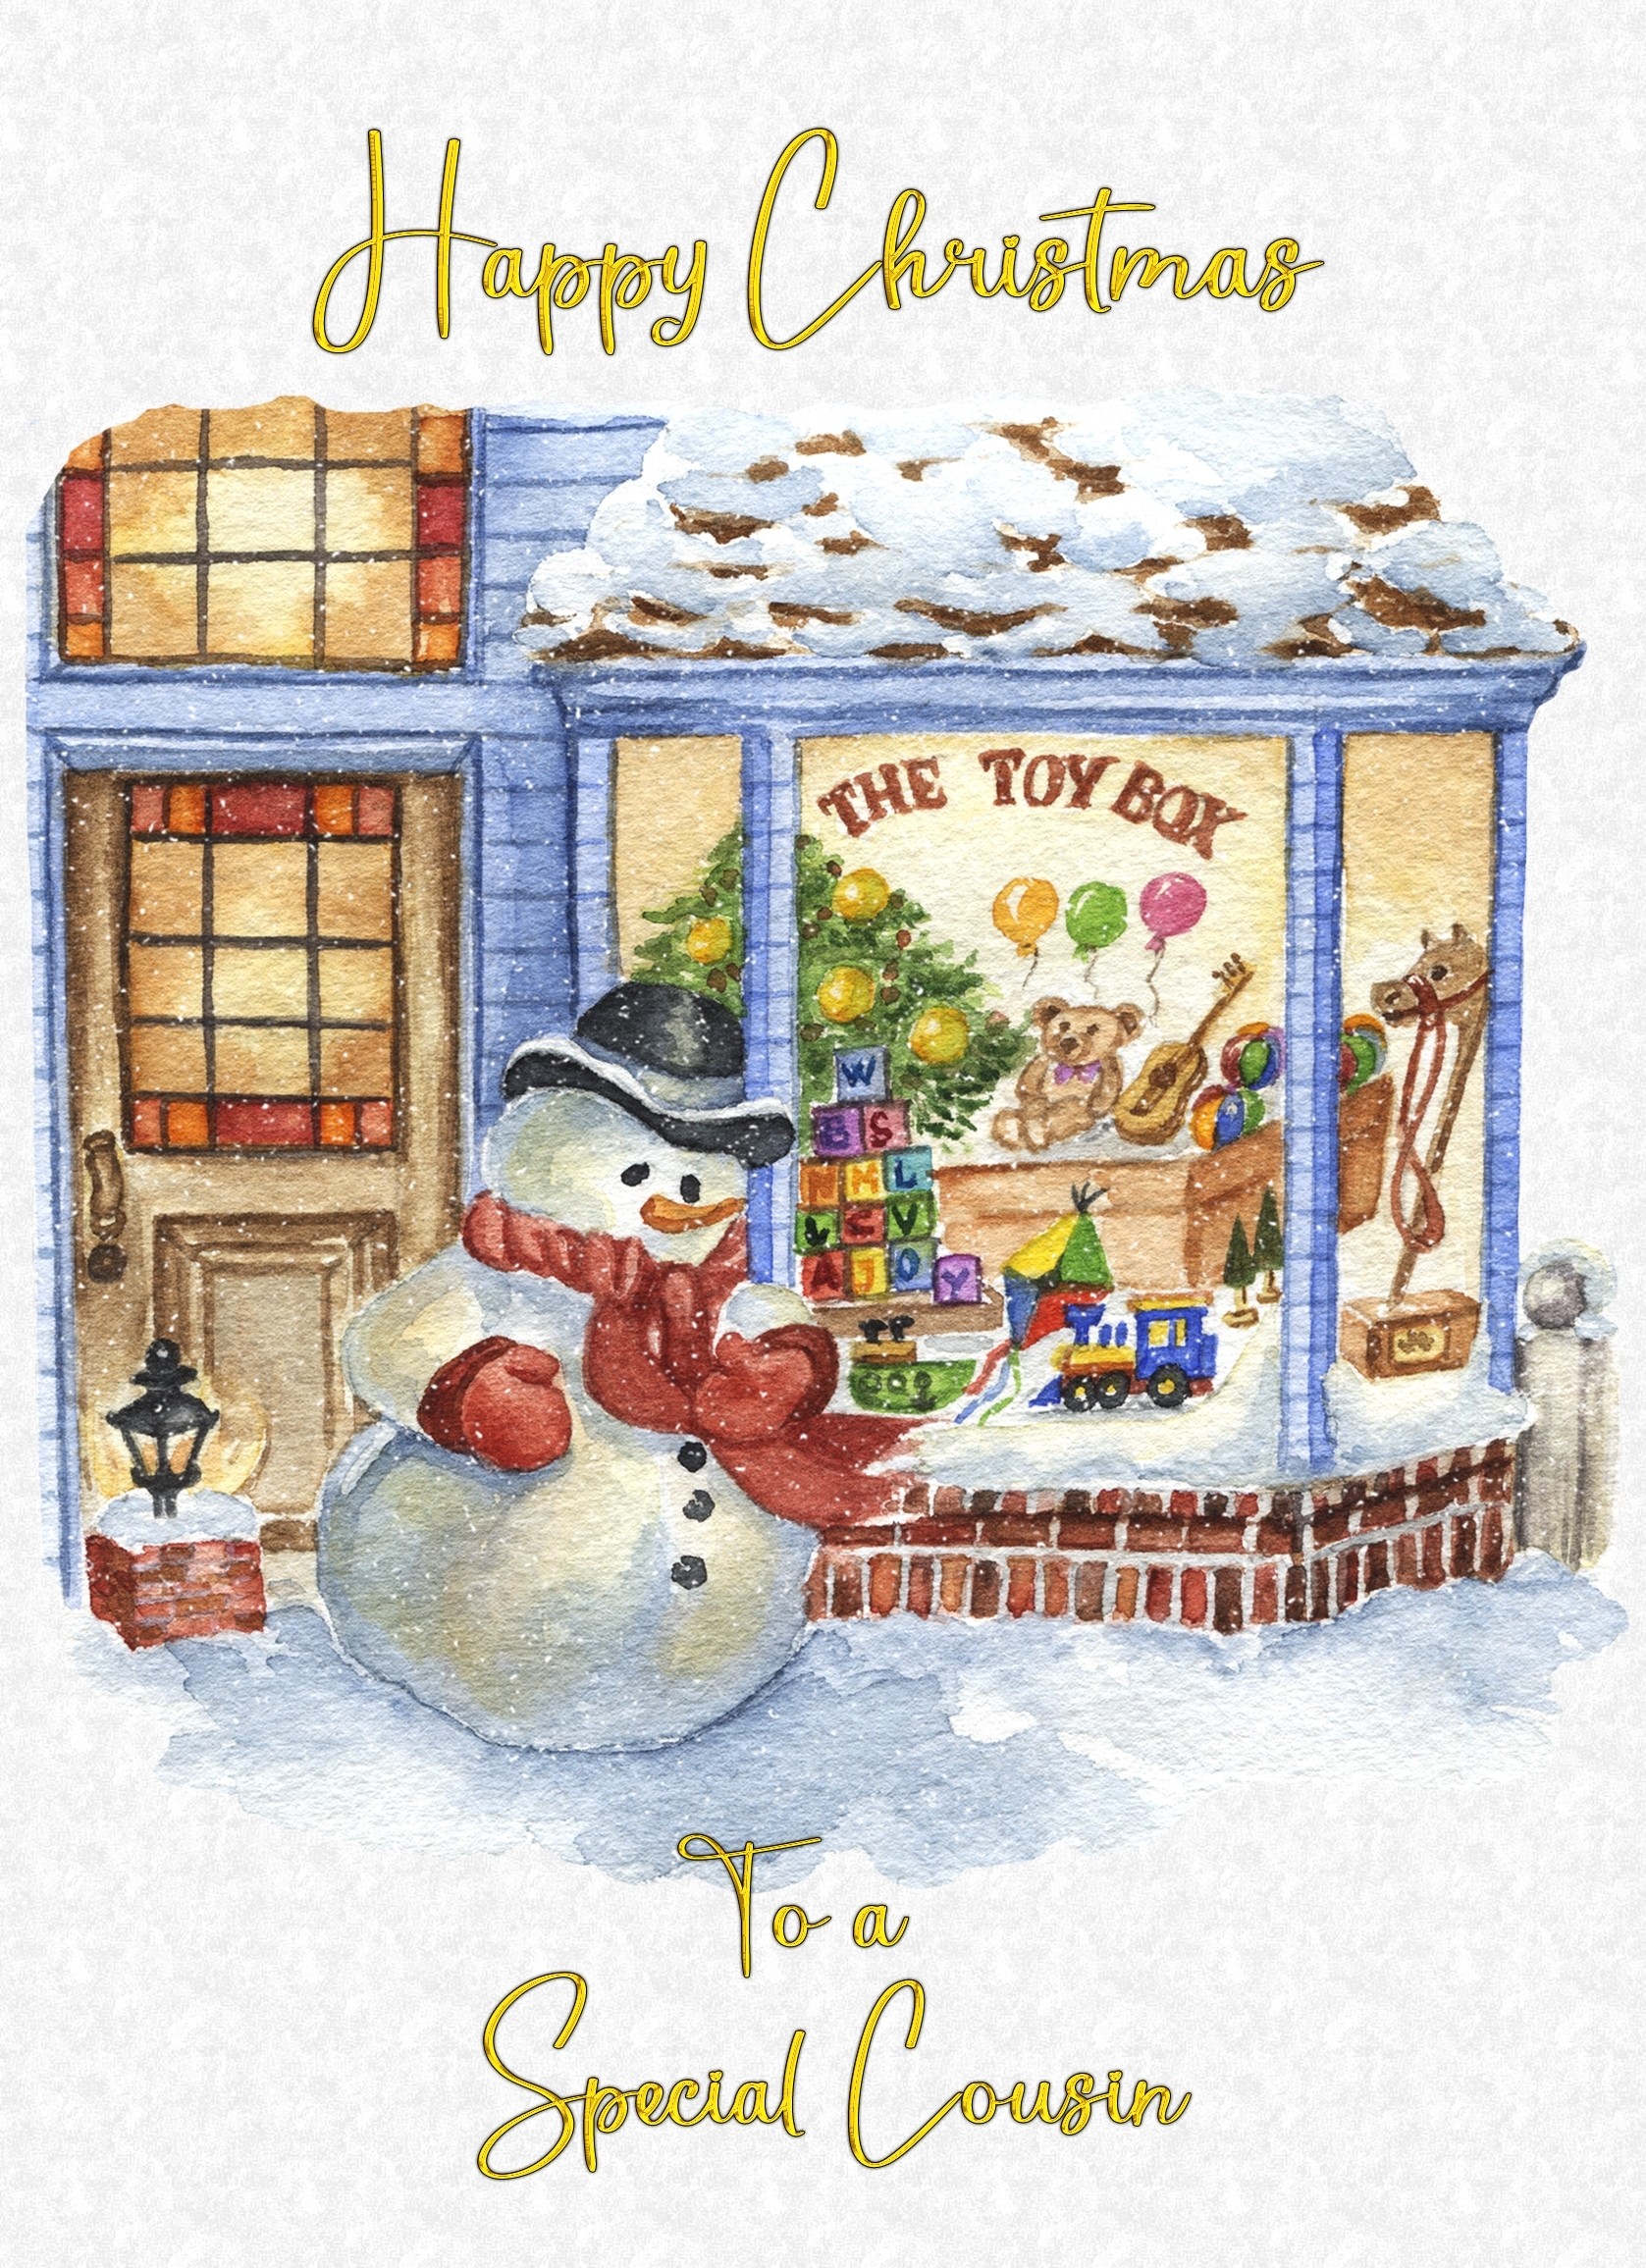 Christmas Card For Cousin (White Snowman)